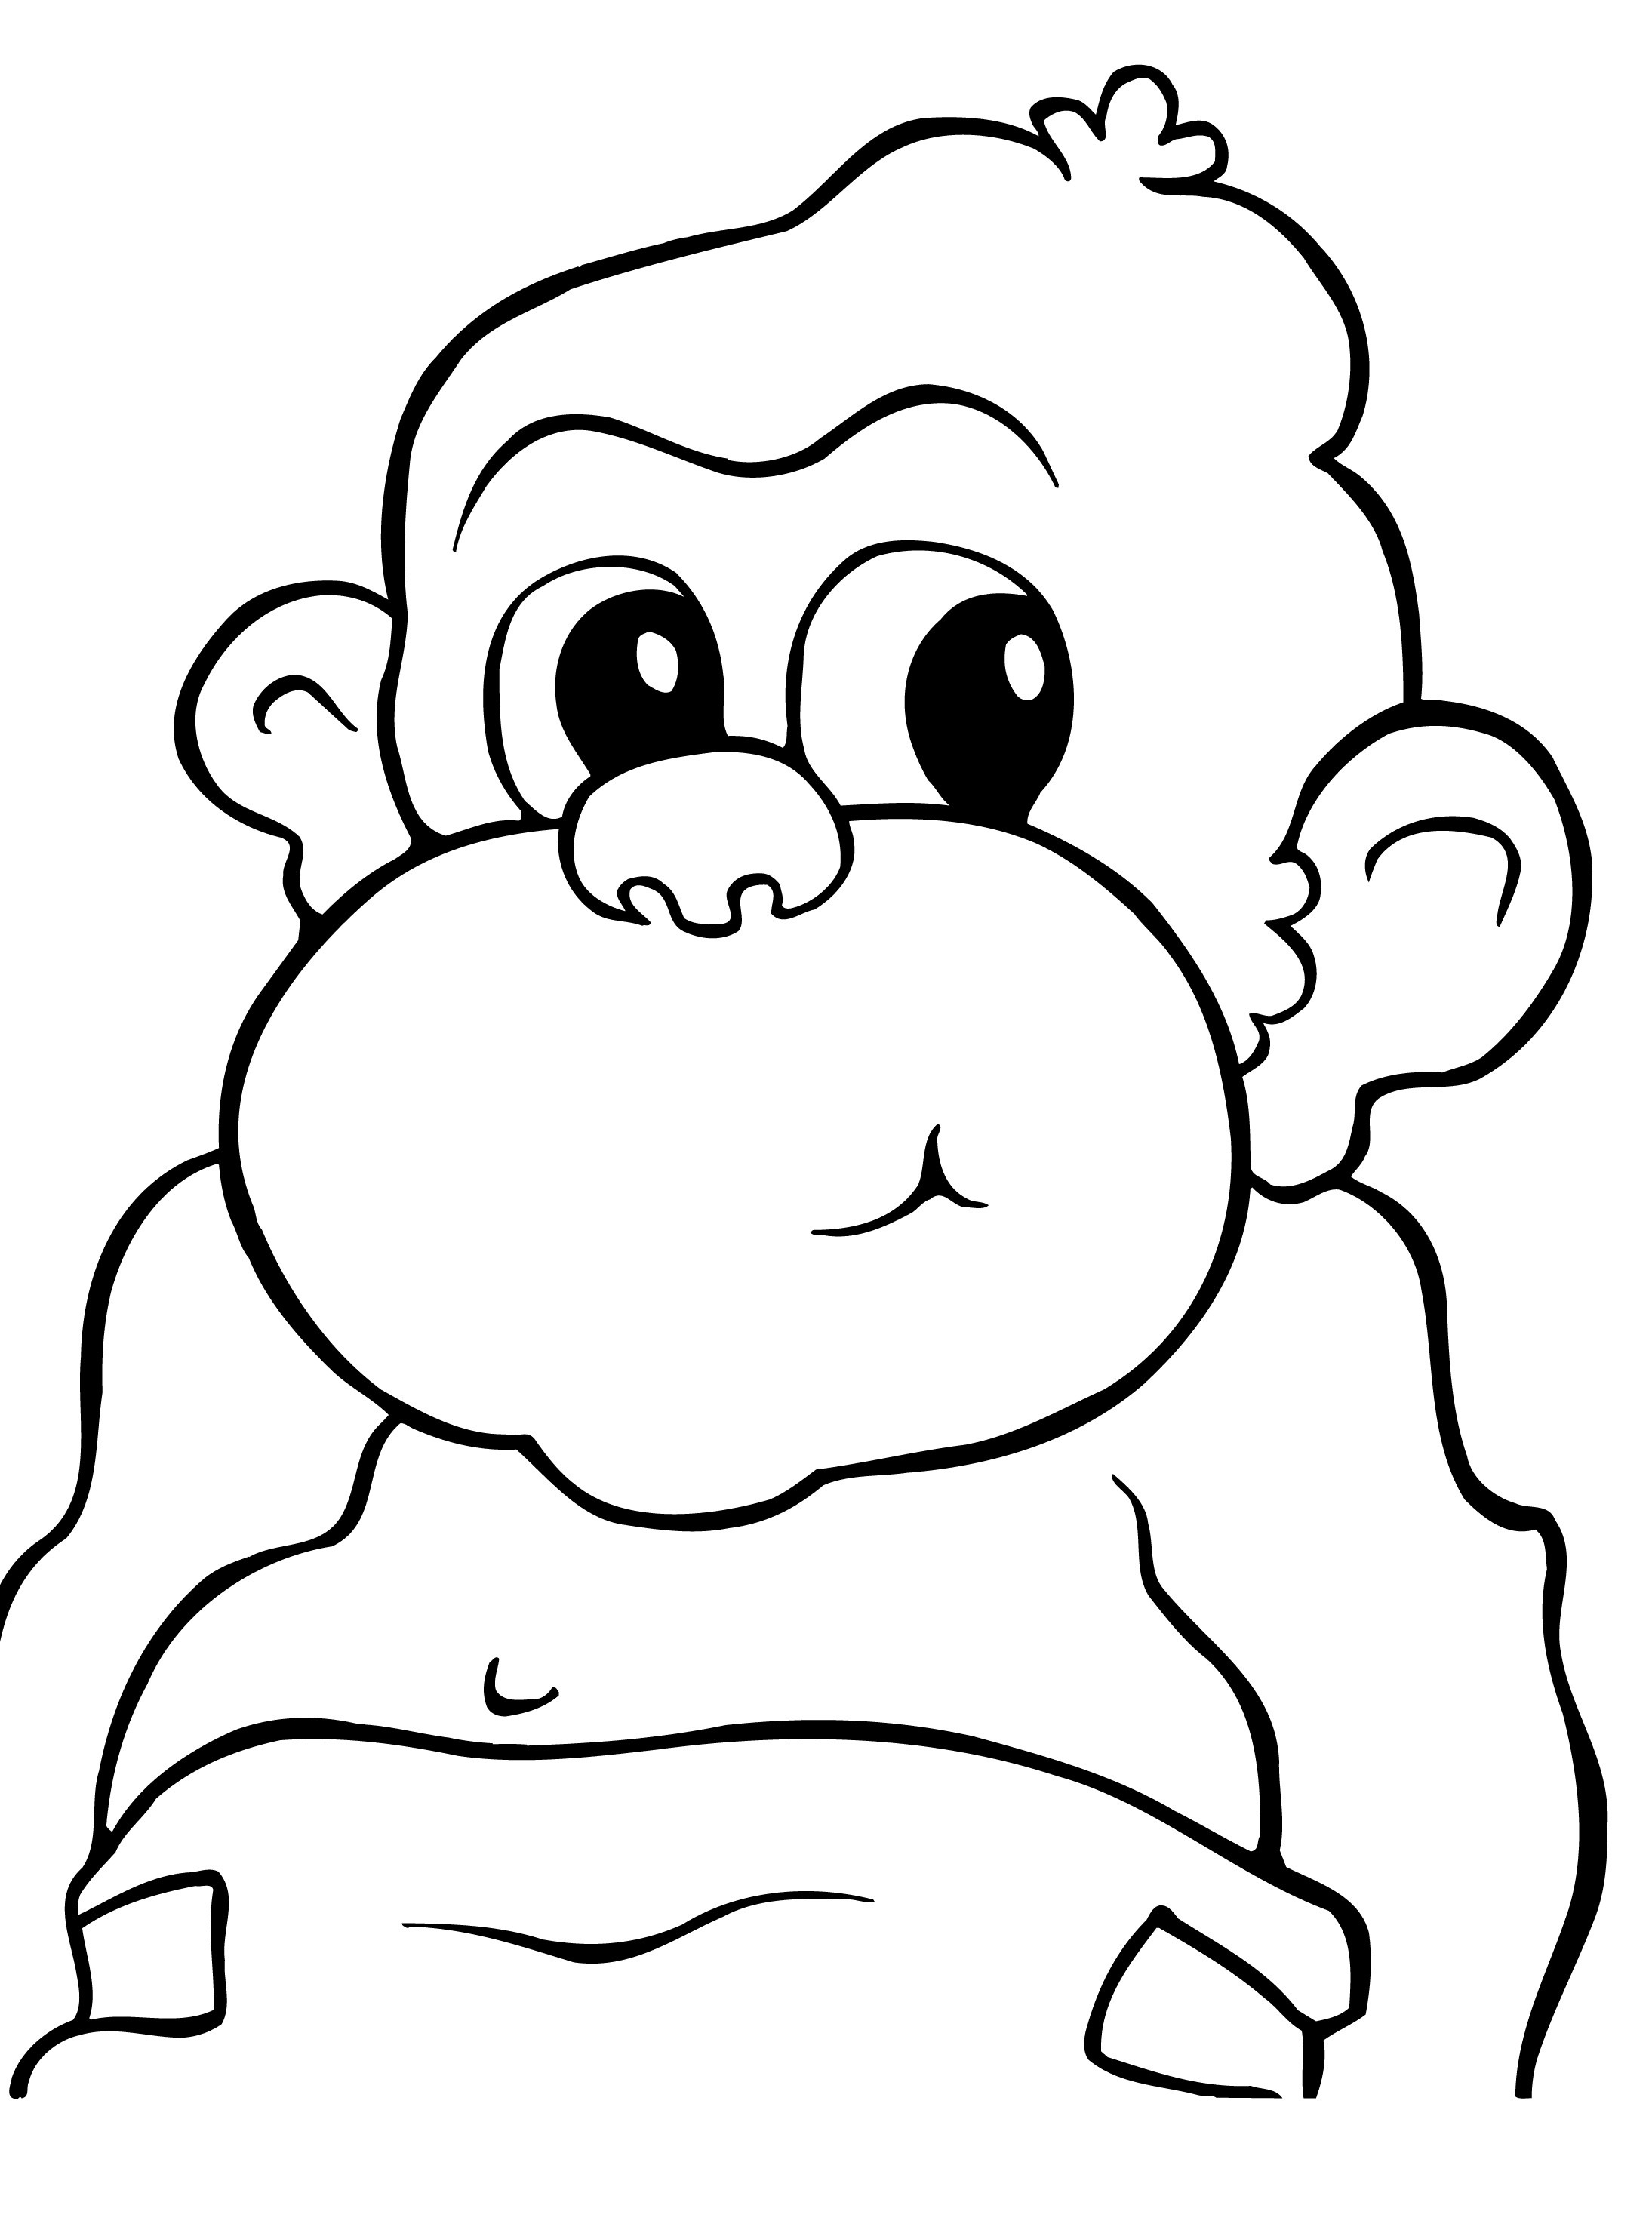 Cartoon Animals Kids Monkey Coloring Page Wecoloringpage.com - Coloring